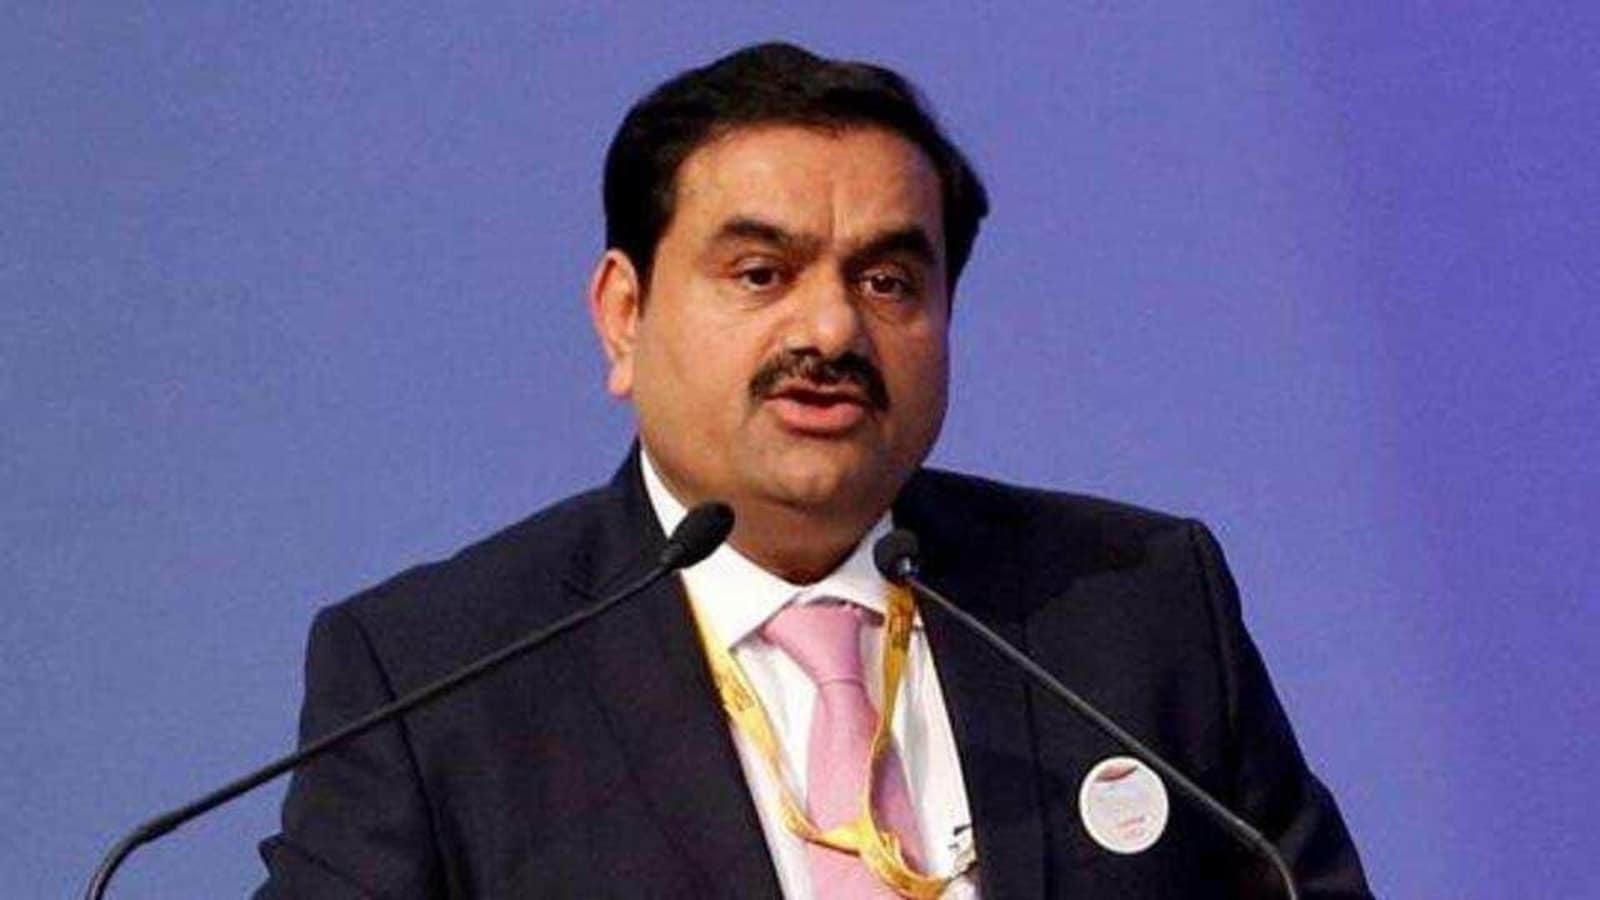 SEBI Approves Adani Group’s: Adani’s Acquisition Of NDTV Gets a Boost